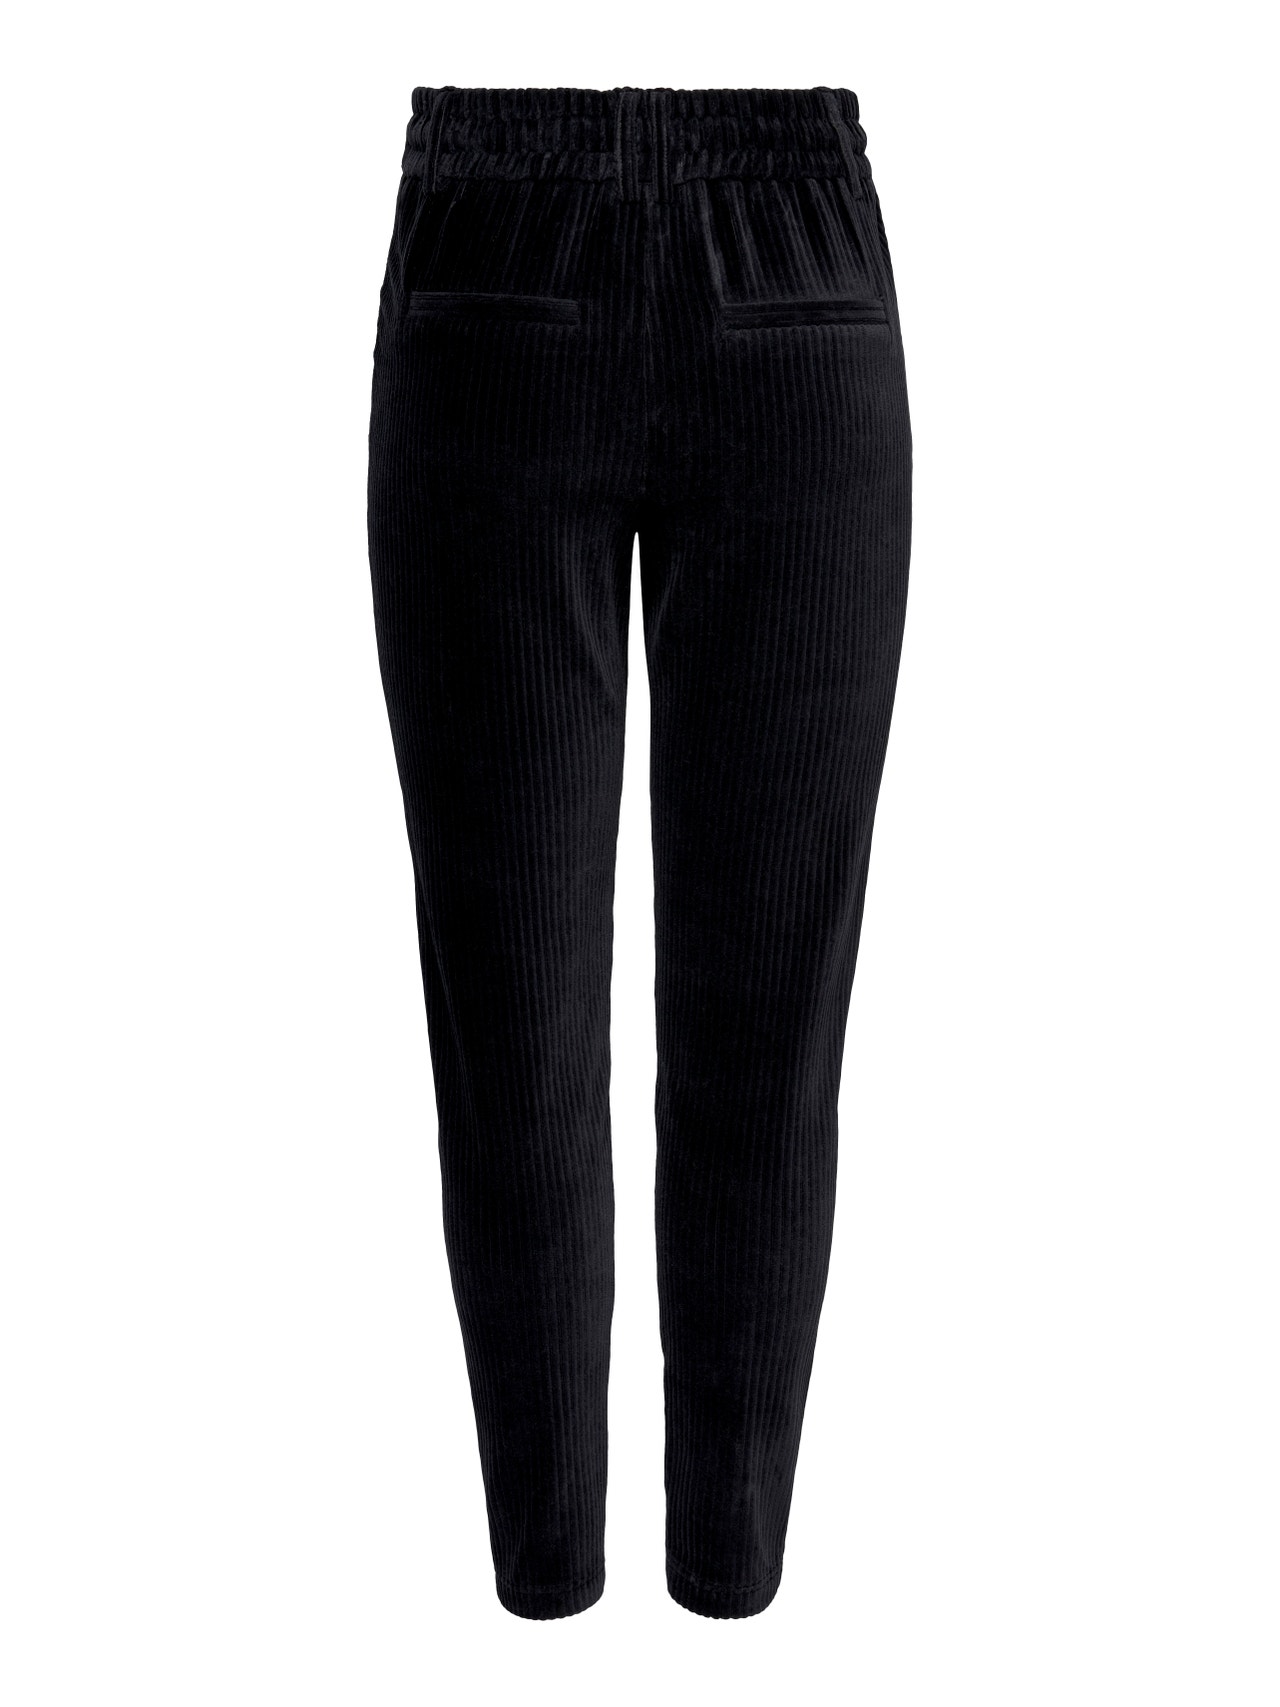 ONLY Regular Fit Trousers -Black - 15191641